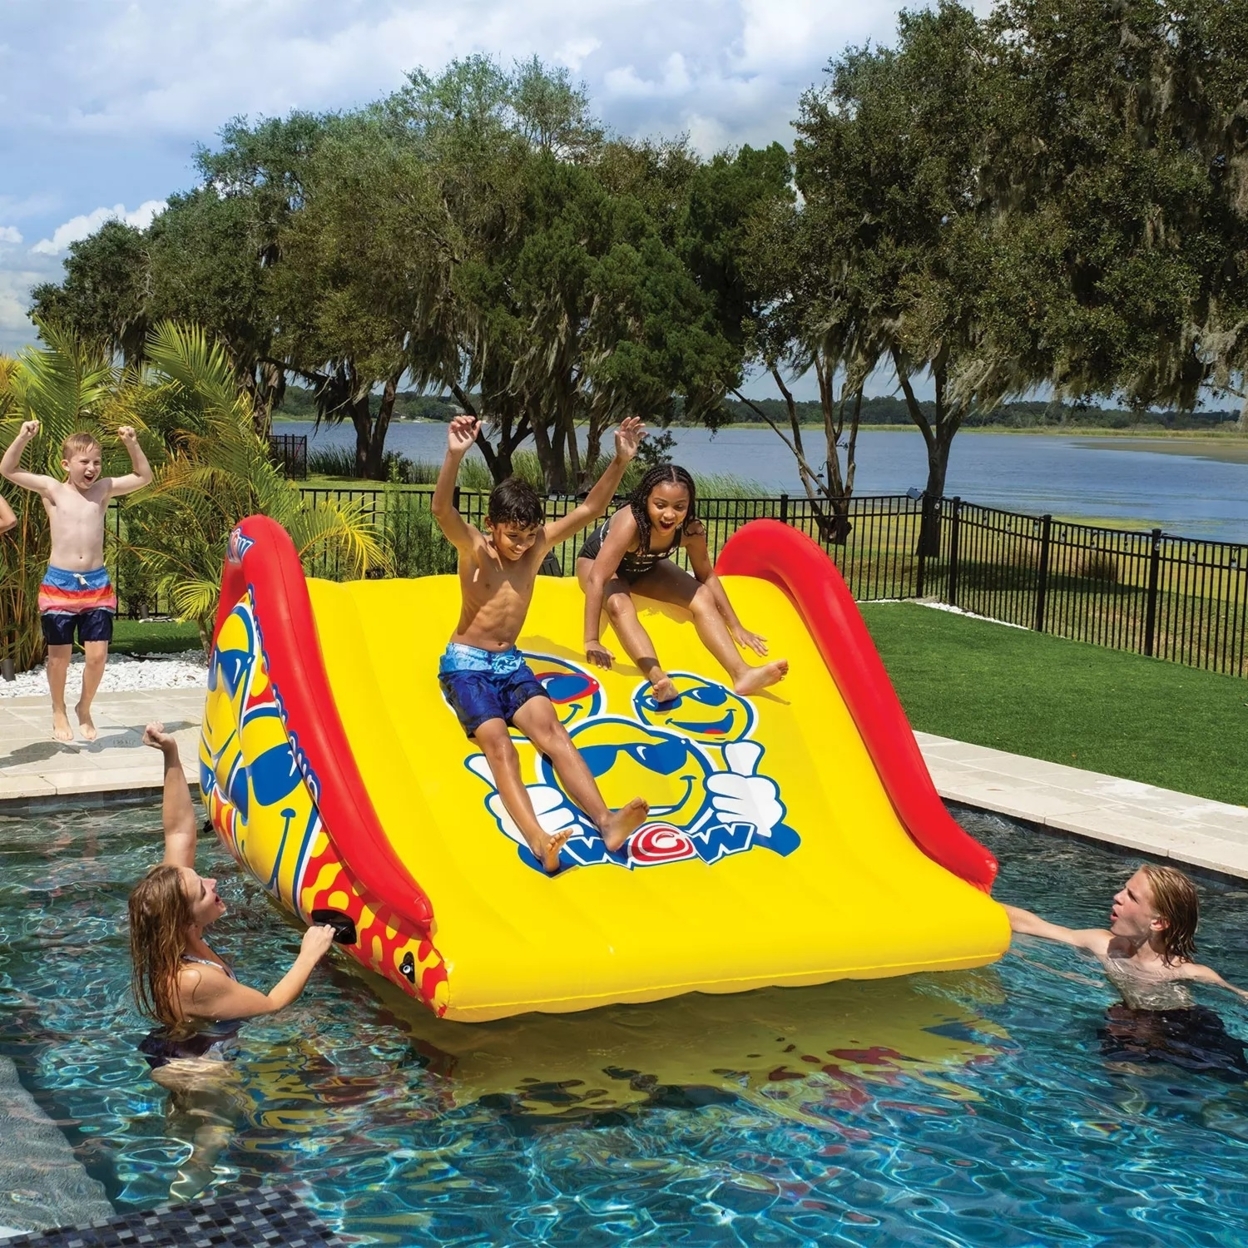 WOW Sports Floating Island Slide and Water Walkway Combo, Red - image 3 of 5